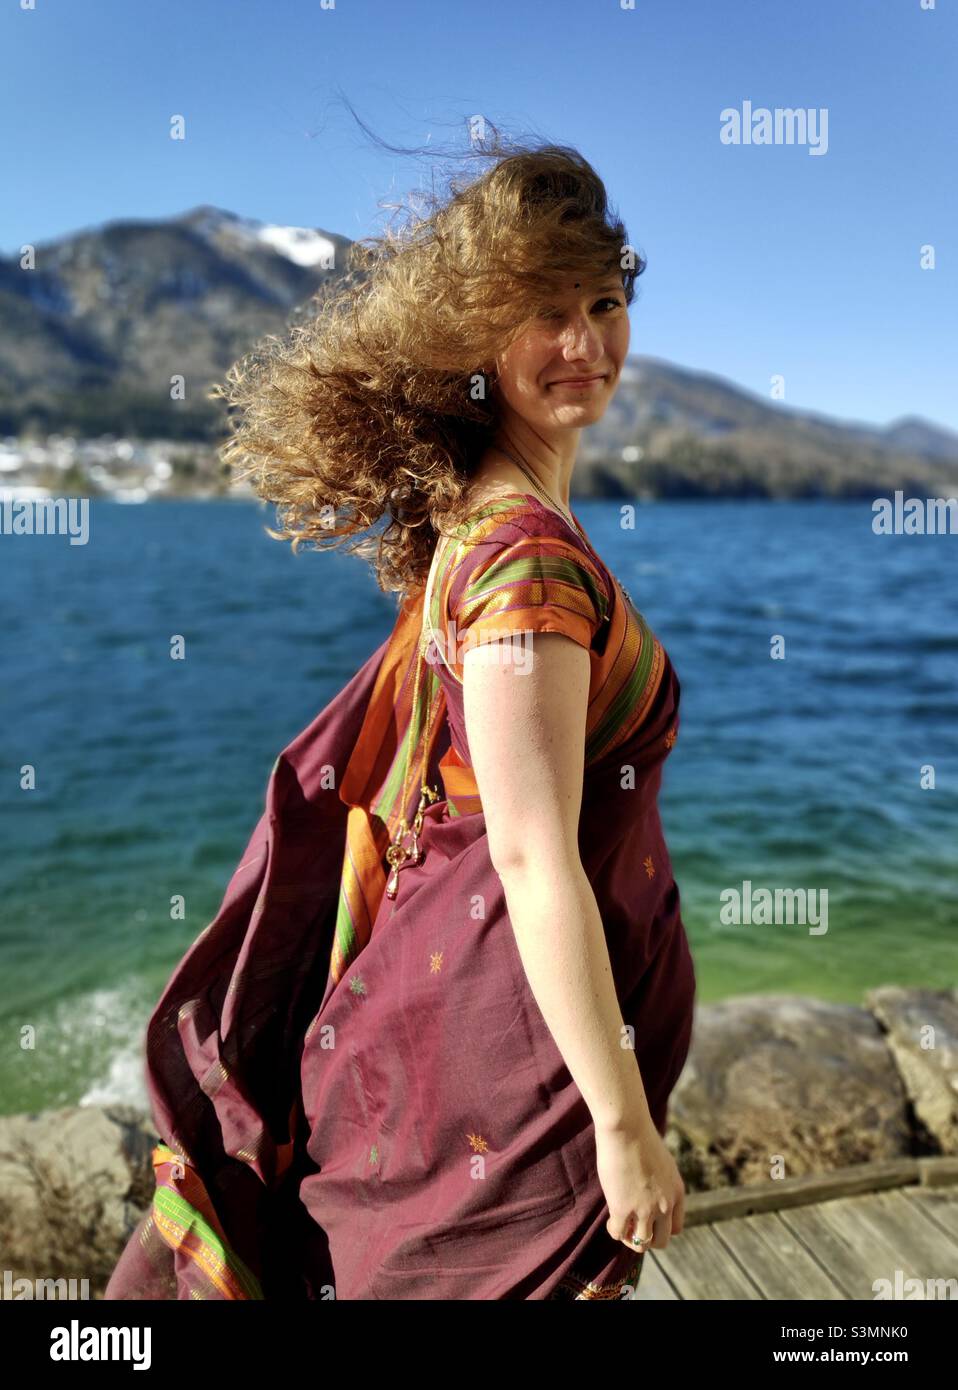 A candid portrait of a woman in natural light near lake fuschlsee in Austria Stock Photo